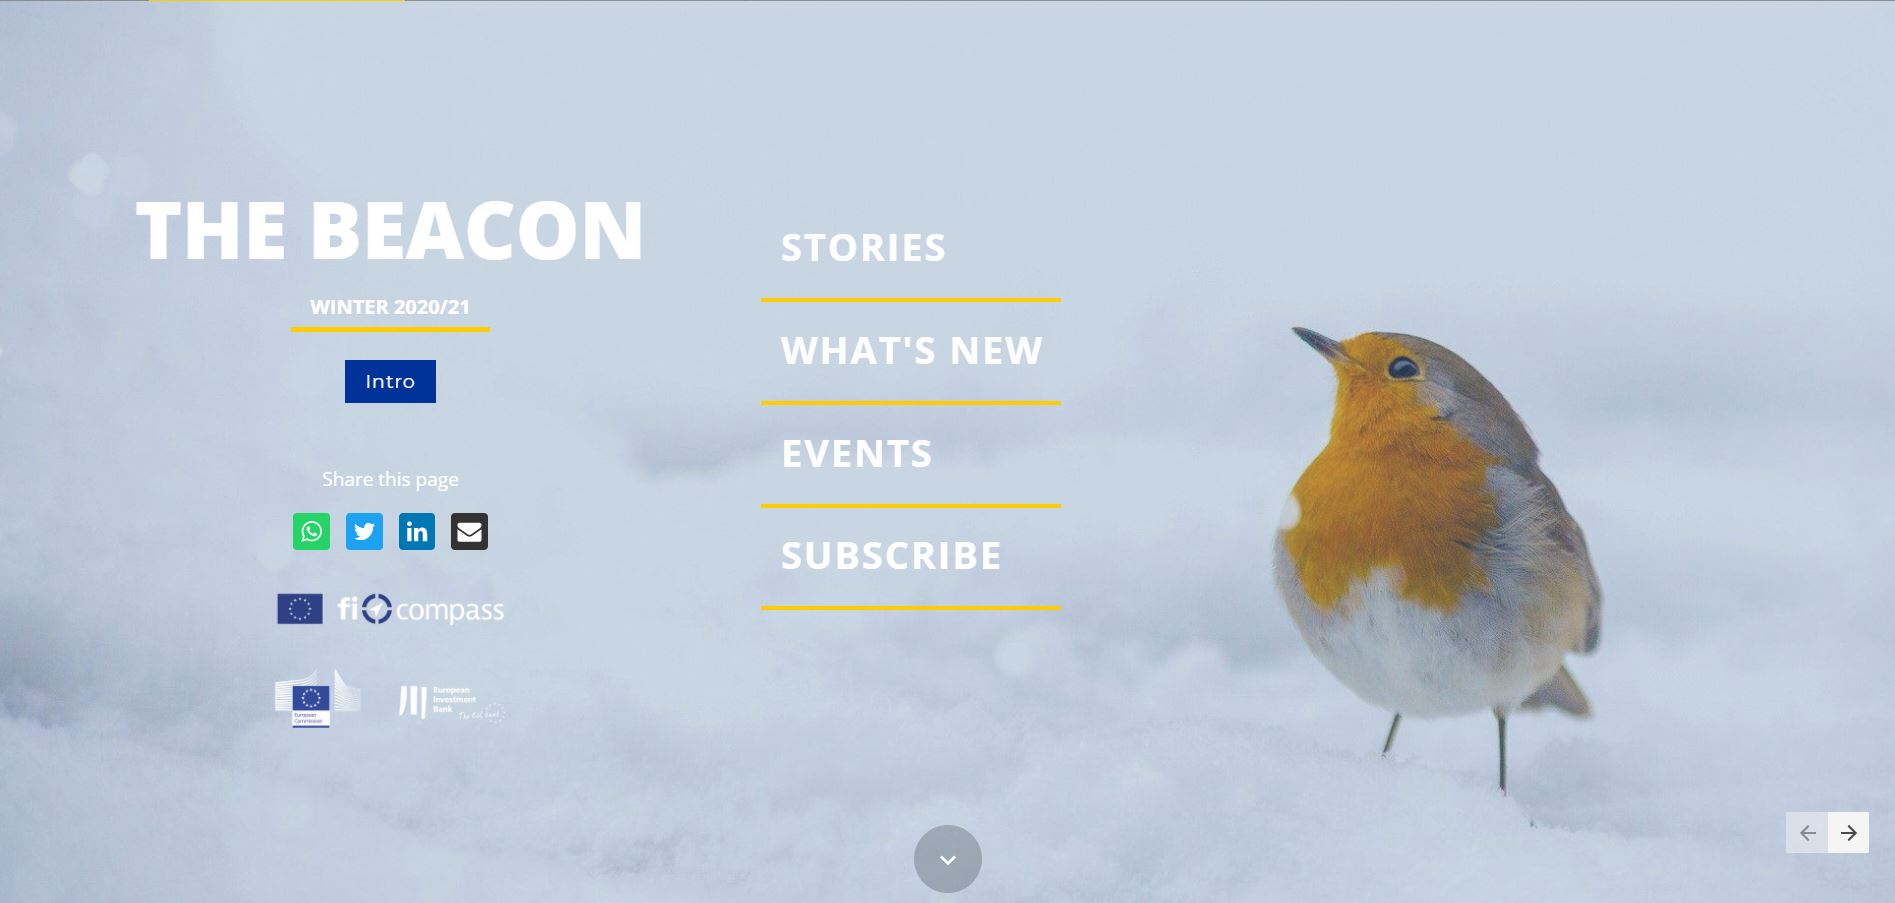 The winter edition of the fi-compass newsletter “The Beacon” is out